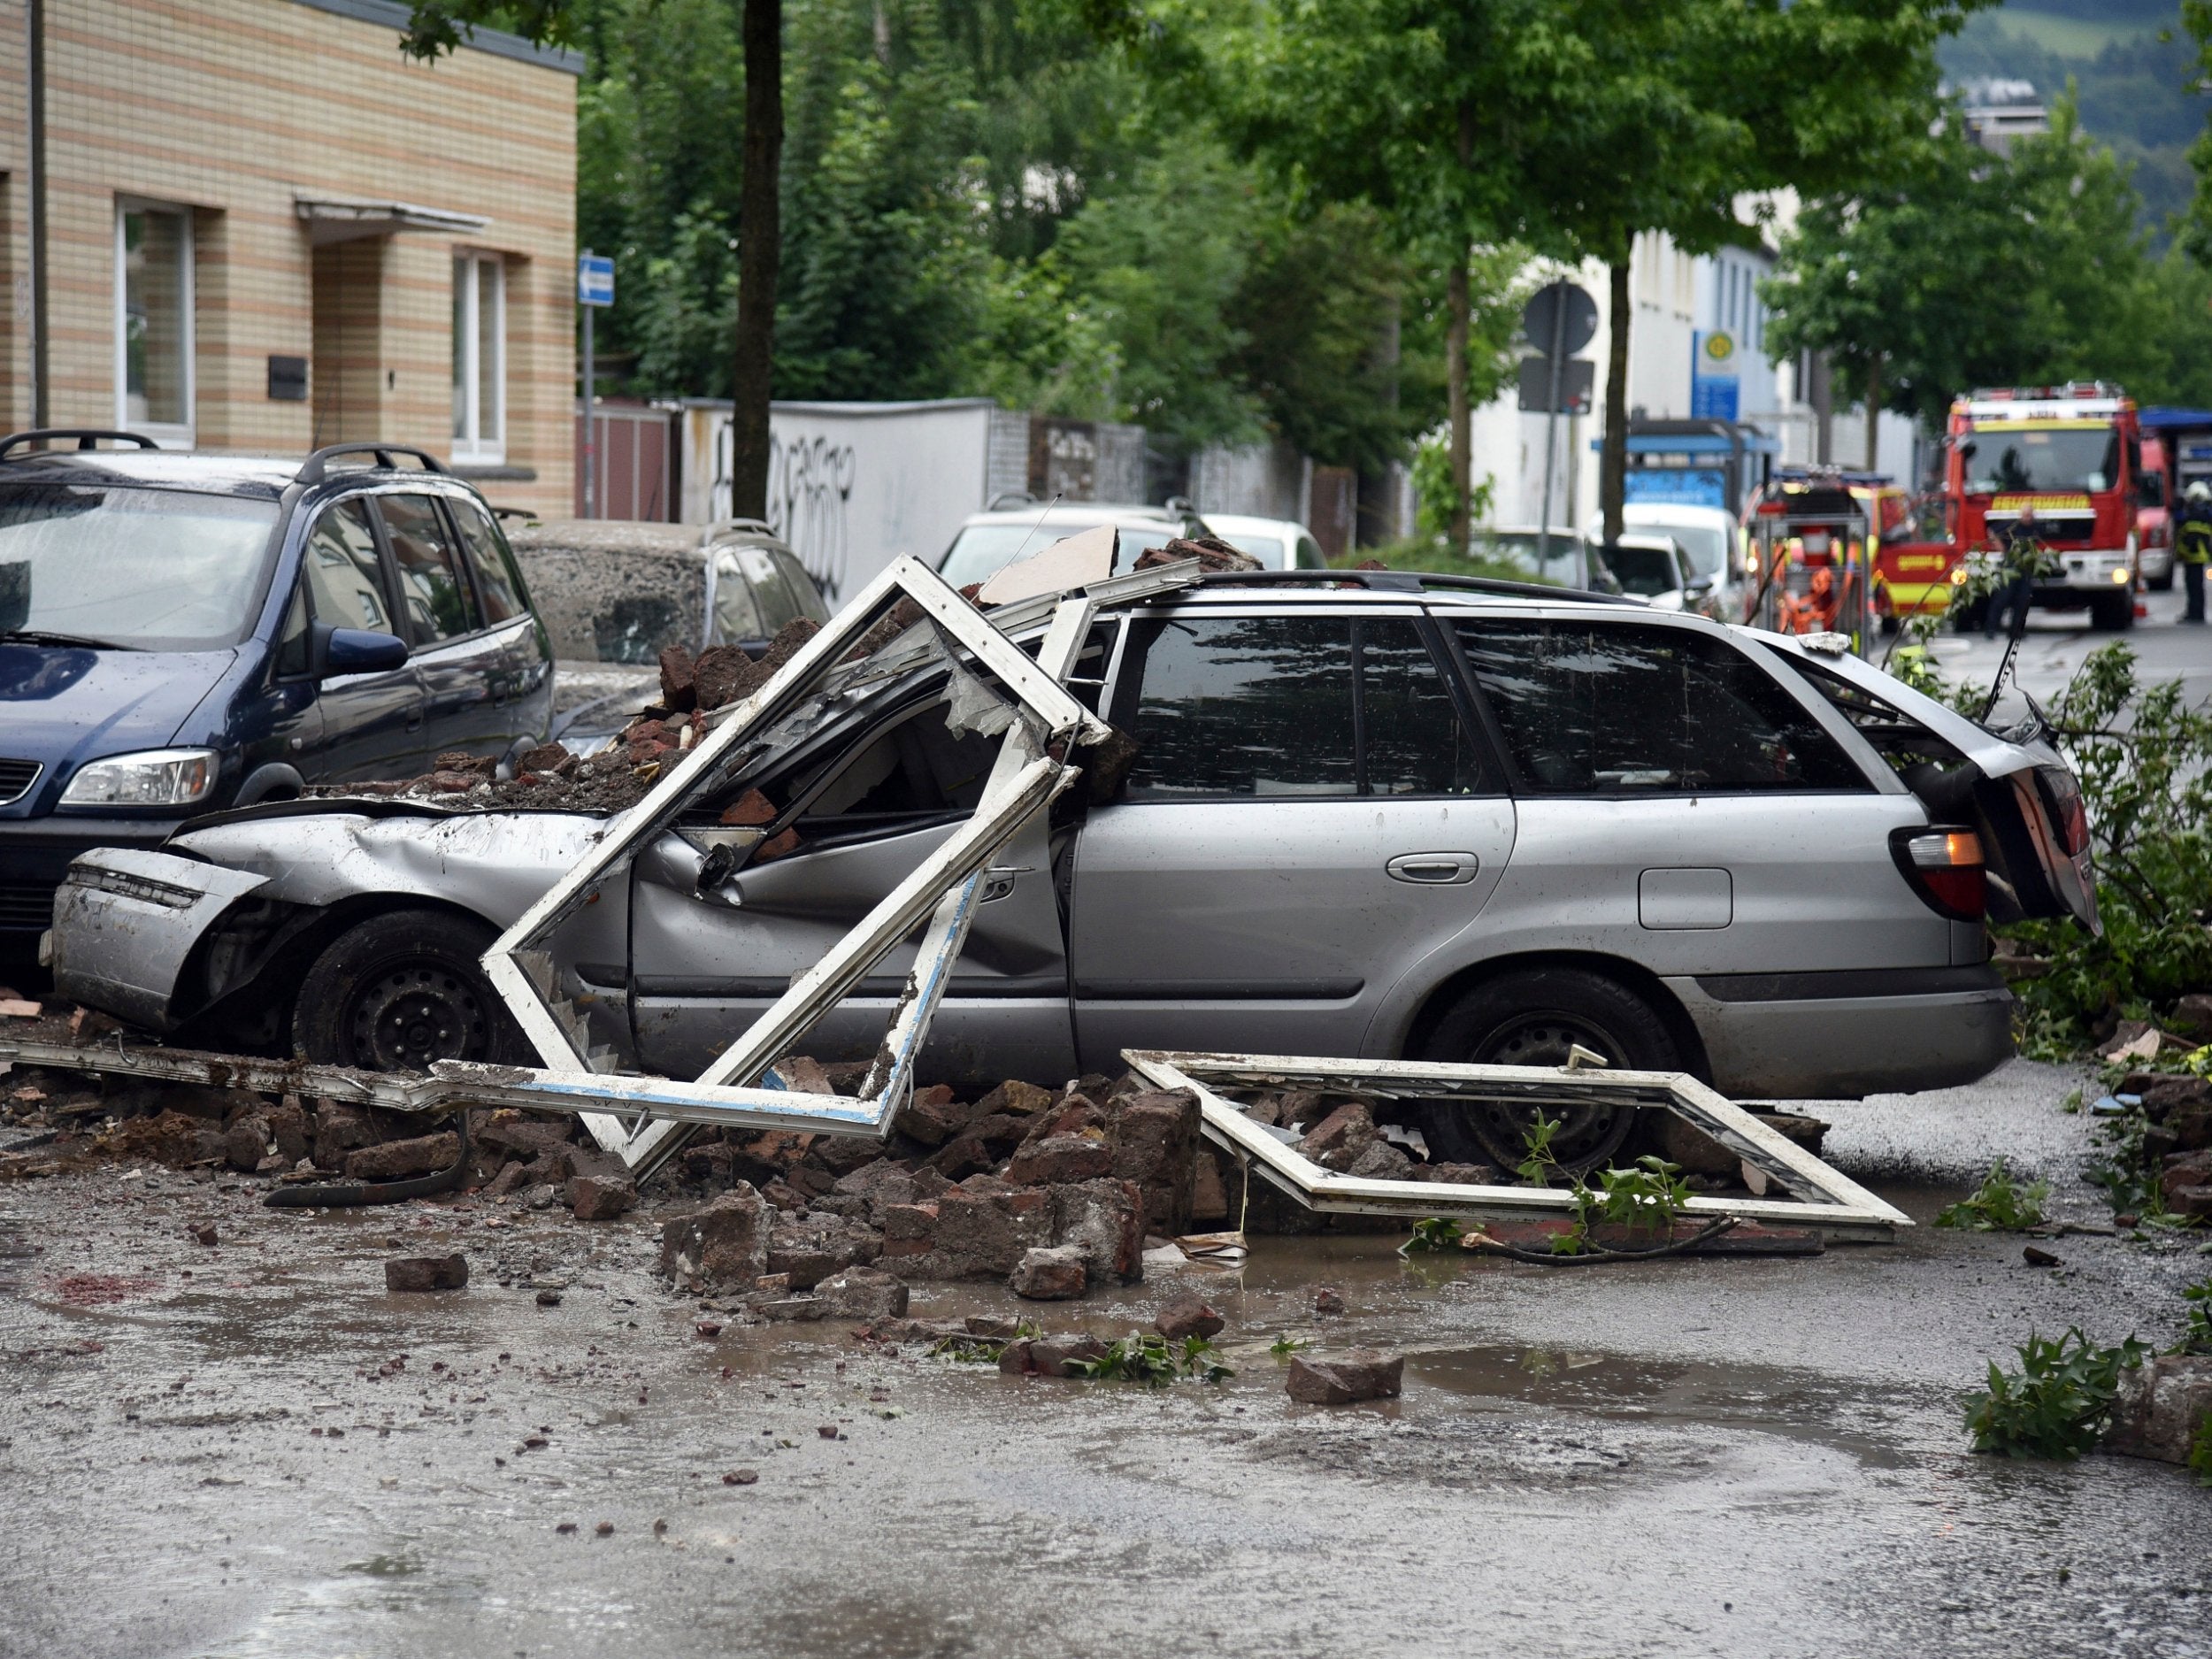 Debris was strewn over the street and a nearby parked car after the explosion